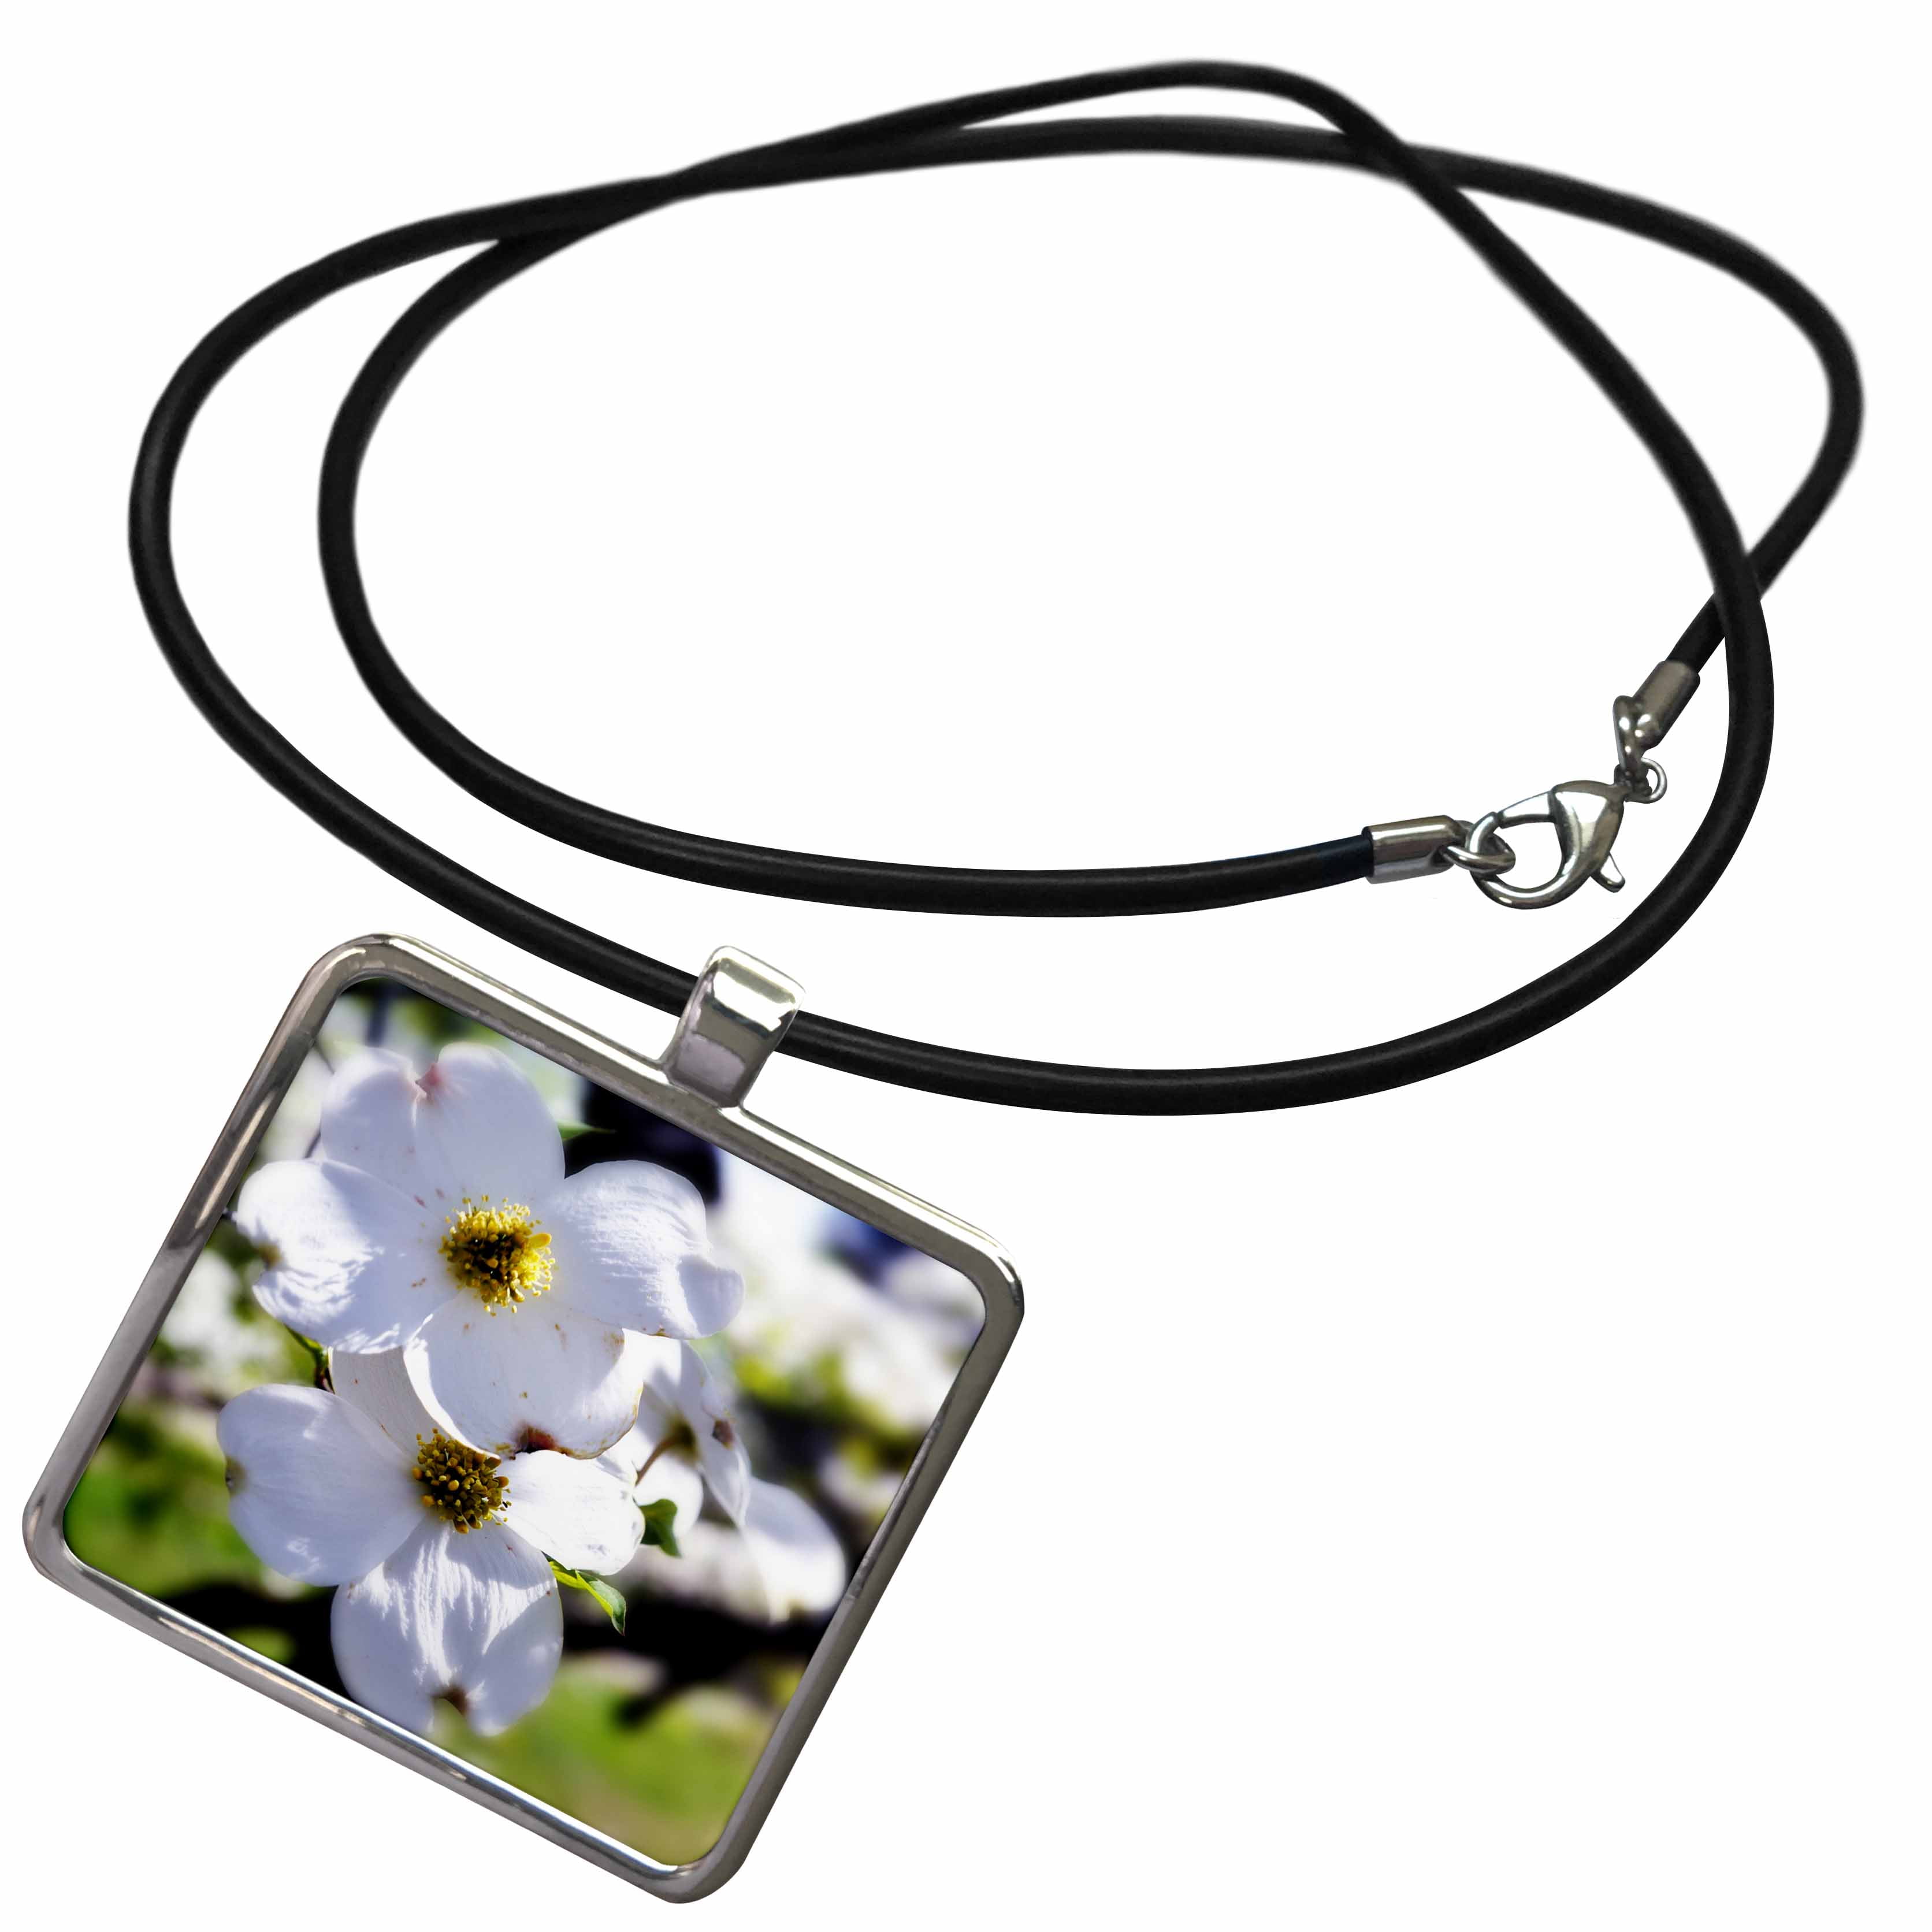 Dogwood Flower Tree Blossom 925 Solid Sterling Silver Pendant Necklace 16" 18" 